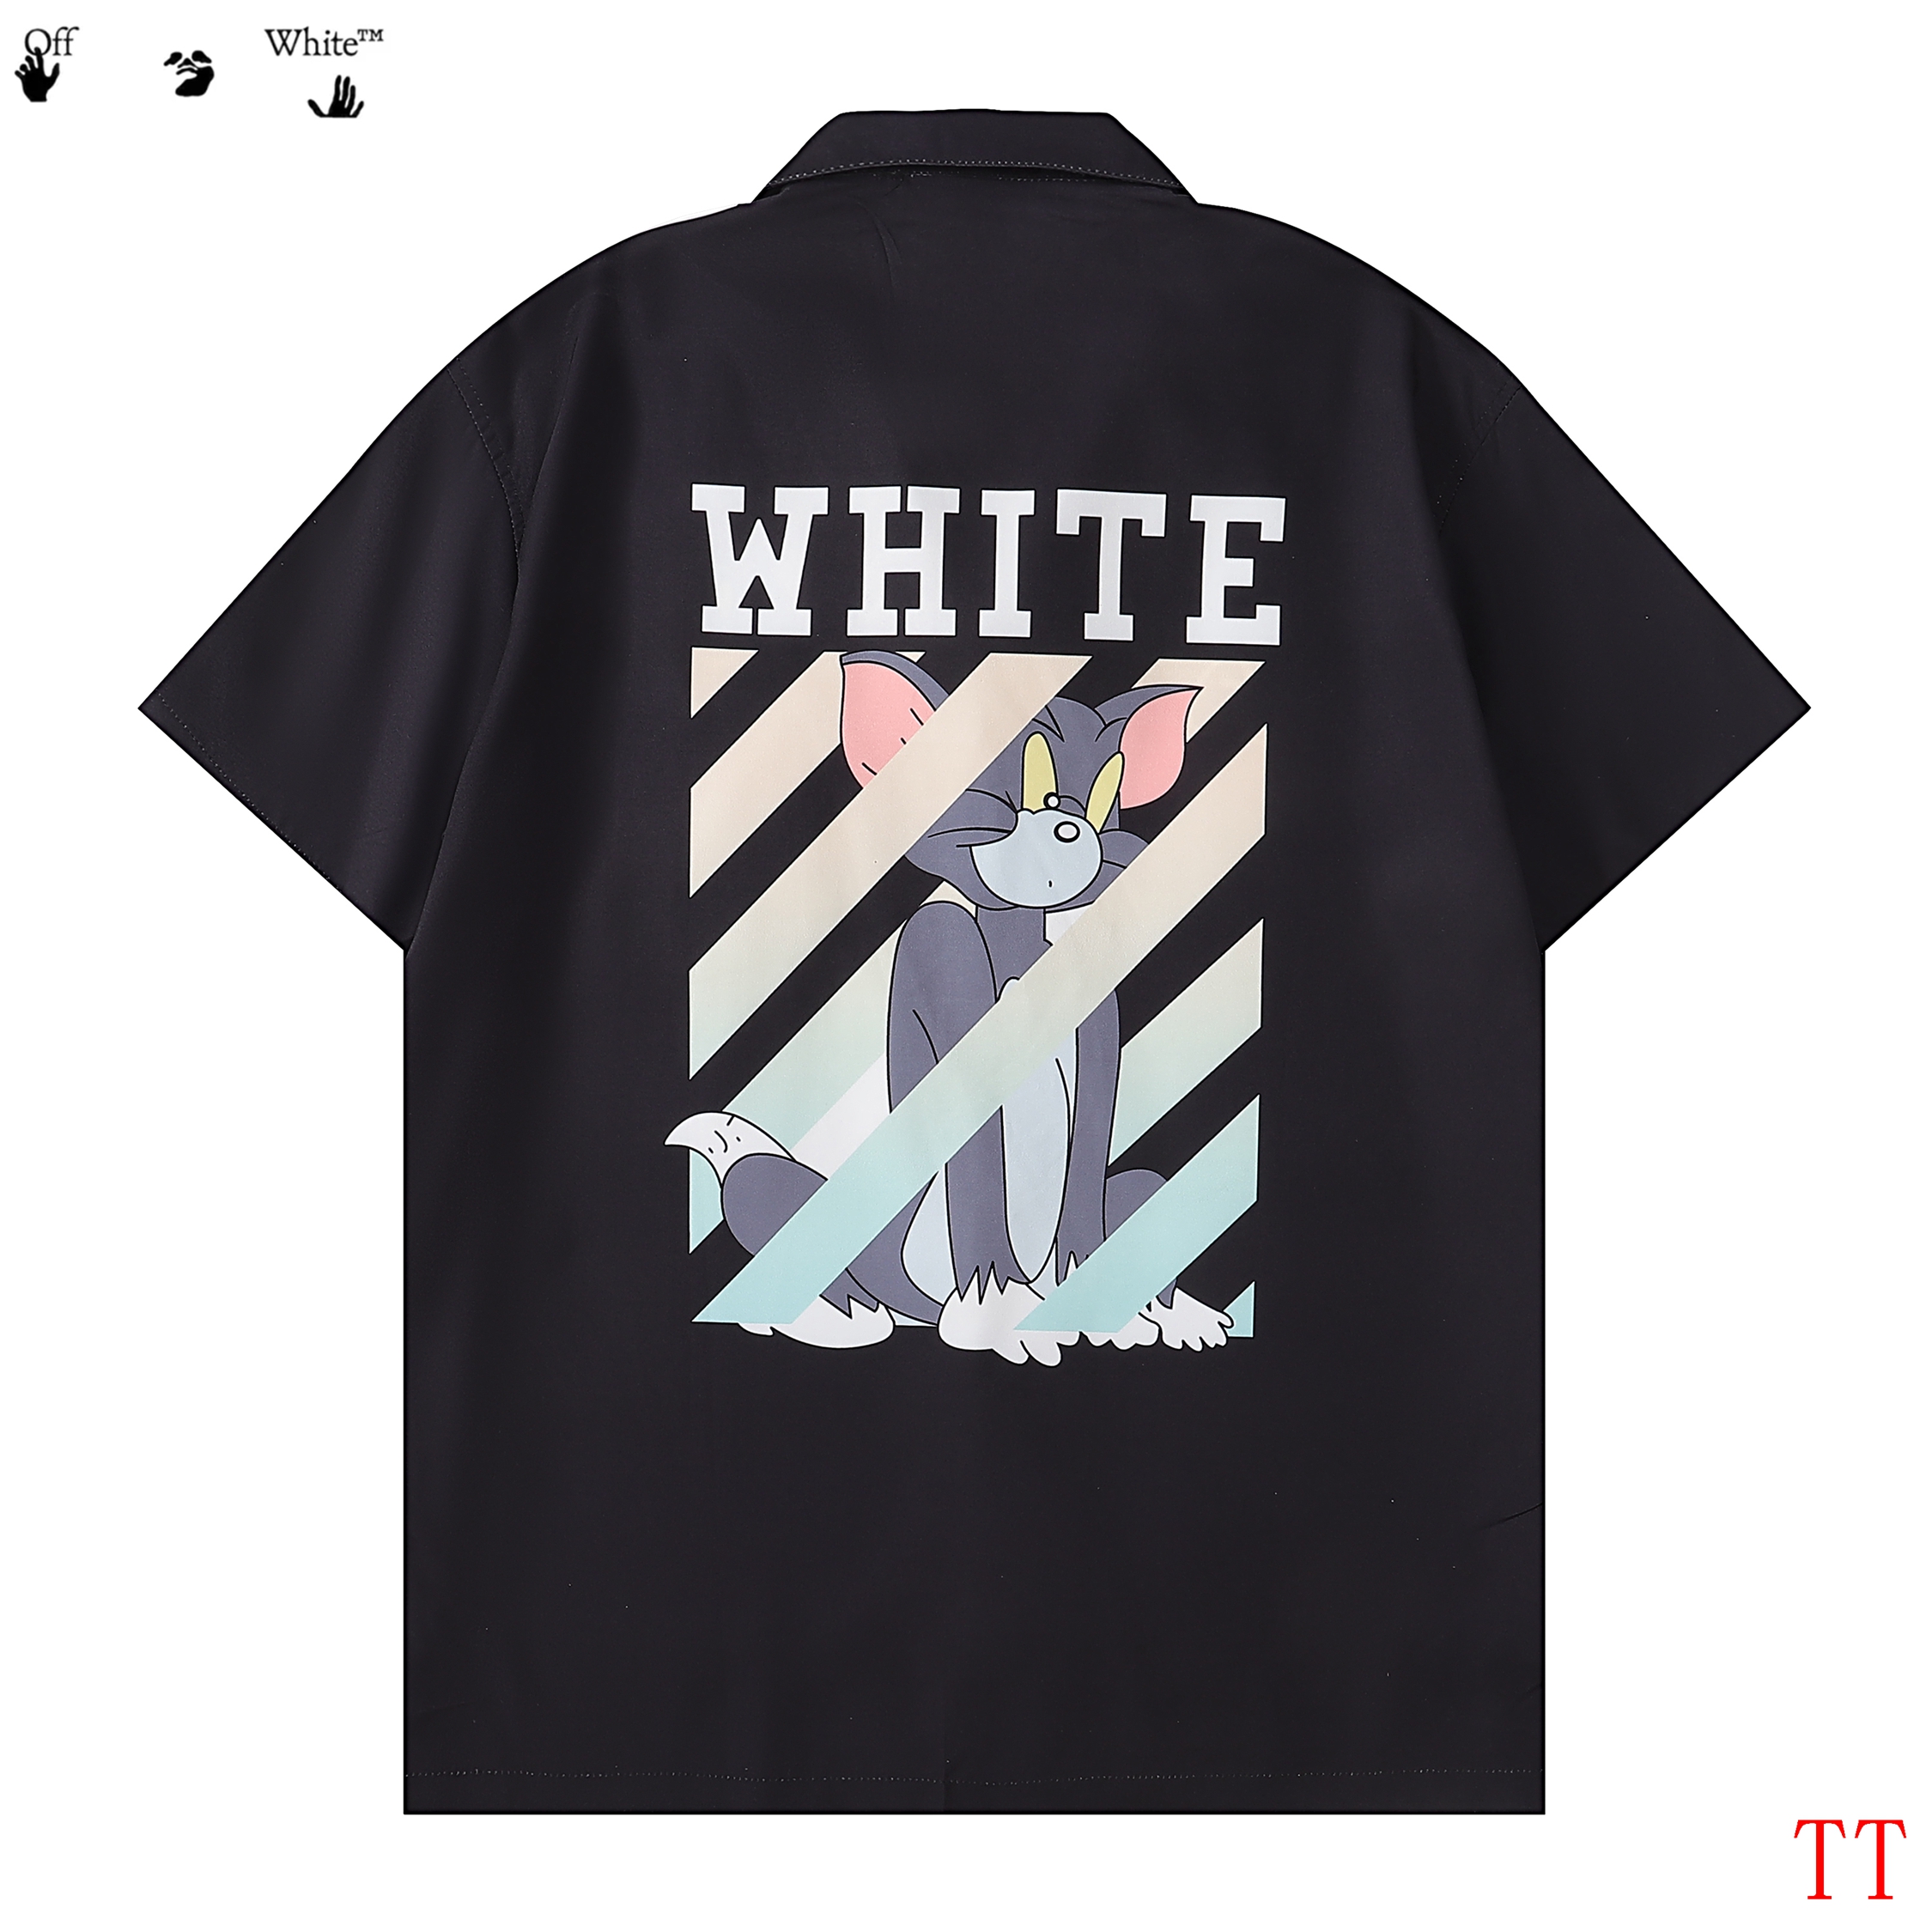 Off White Short Sleeve Button up Shirt Unisex # 270724, cheap Off White Shirts, only $27!